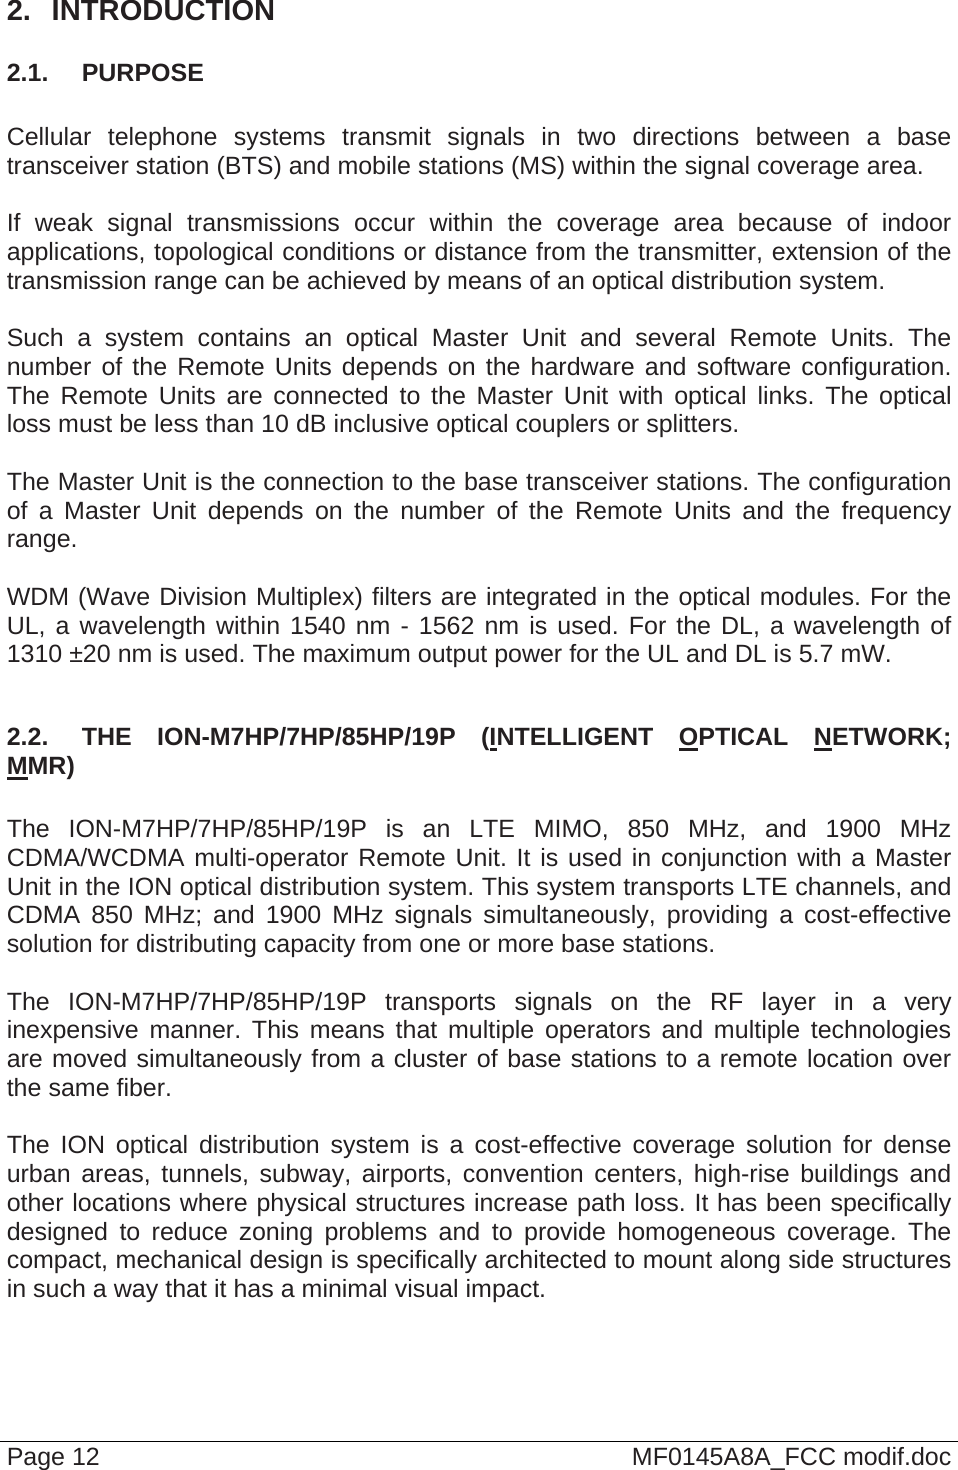  Page 12  MF0145A8A_FCC modif.doc 2.  INTRODUCTION 2.1.  PURPOSE  Cellular telephone systems transmit signals in two directions between a base transceiver station (BTS) and mobile stations (MS) within the signal coverage area.  If weak signal transmissions occur within the coverage area because of indoor applications, topological conditions or distance from the transmitter, extension of the transmission range can be achieved by means of an optical distribution system.  Such a system contains an optical Master Unit and several Remote Units. The number of the Remote Units depends on the hardware and software configuration. The Remote Units are connected to the Master Unit with optical links. The optical loss must be less than 10 dB inclusive optical couplers or splitters.  The Master Unit is the connection to the base transceiver stations. The configuration of a Master Unit depends on the number of the Remote Units and the frequency range.   WDM (Wave Division Multiplex) filters are integrated in the optical modules. For the UL, a wavelength within 1540 nm - 1562 nm is used. For the DL, a wavelength of 1310 ±20 nm is used. The maximum output power for the UL and DL is 5.7 mW.  2.2.  THE ION-M7HP/7HP/85HP/19P (INTELLIGENT OPTICAL NETWORK; MMR)  The ION-M7HP/7HP/85HP/19P is an LTE MIMO, 850 MHz, and 1900 MHz CDMA/WCDMA multi-operator Remote Unit. It is used in conjunction with a Master Unit in the ION optical distribution system. This system transports LTE channels, and CDMA 850 MHz; and 1900 MHz signals simultaneously, providing a cost-effective solution for distributing capacity from one or more base stations.  The ION-M7HP/7HP/85HP/19P transports signals on the RF layer in a very inexpensive manner. This means that multiple operators and multiple technologies are moved simultaneously from a cluster of base stations to a remote location over the same fiber.  The ION optical distribution system is a cost-effective coverage solution for dense urban areas, tunnels, subway, airports, convention centers, high-rise buildings and other locations where physical structures increase path loss. It has been specifically designed to reduce zoning problems and to provide homogeneous coverage. The compact, mechanical design is specifically architected to mount along side structures in such a way that it has a minimal visual impact.  